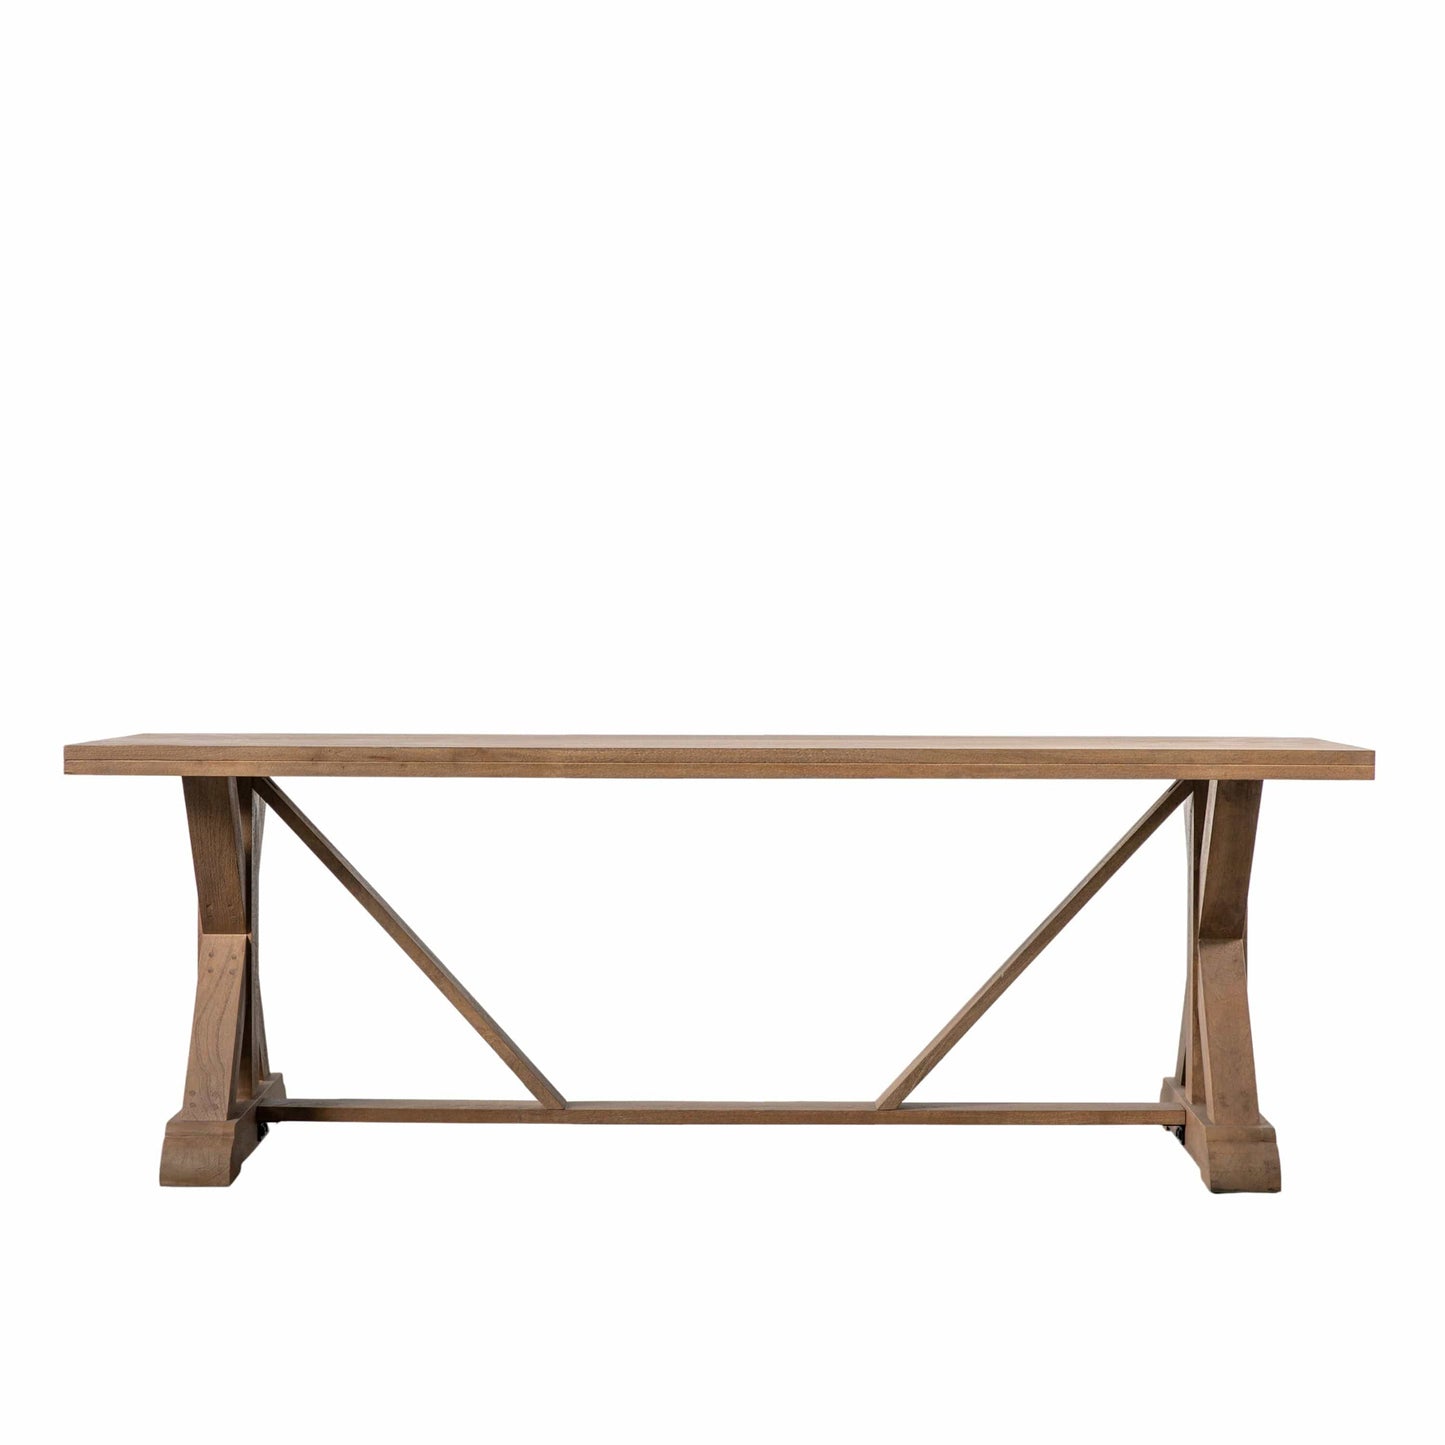 Ashbourne Dining Table